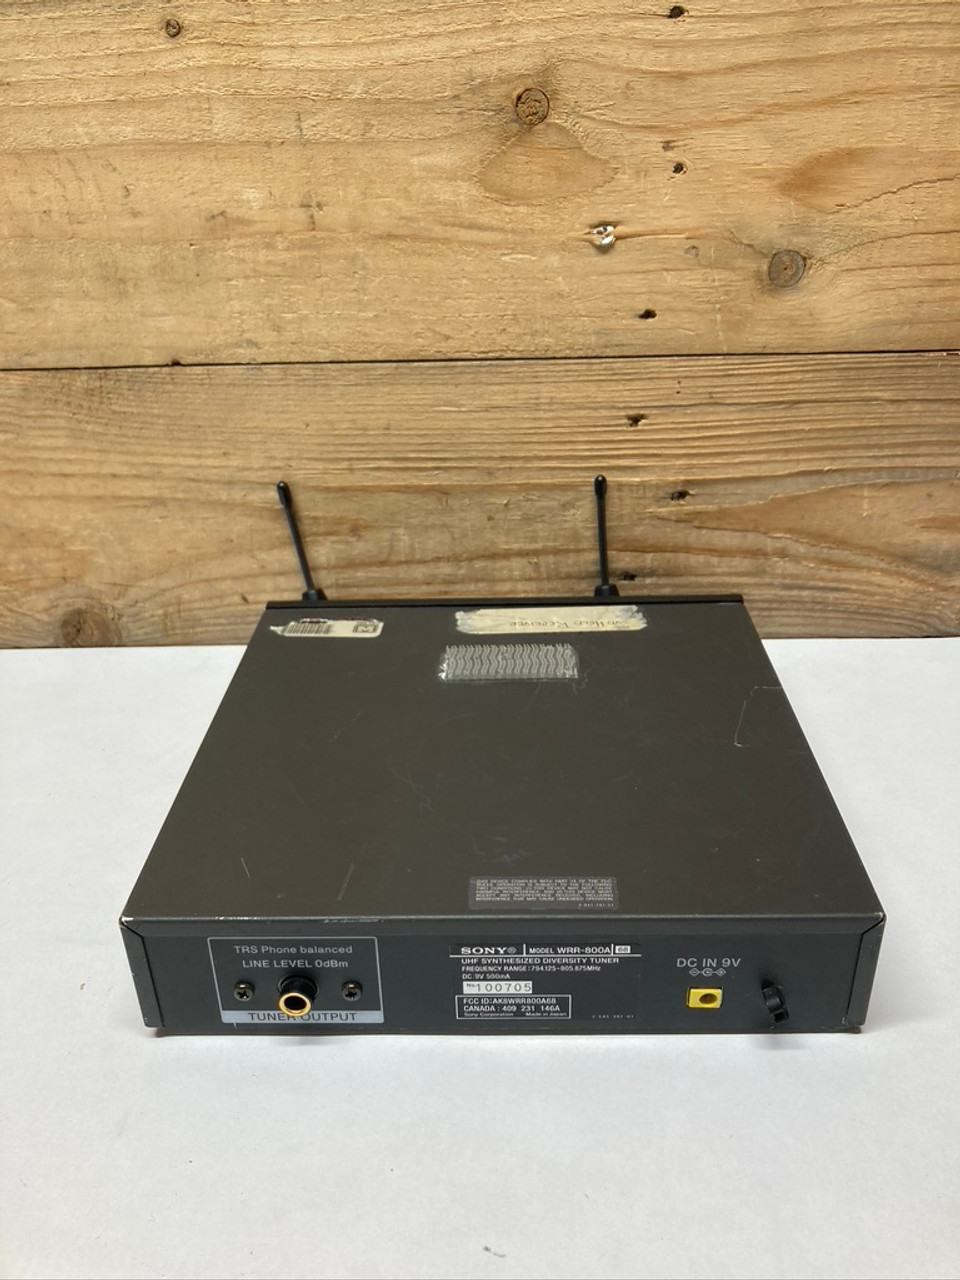 UHF Synthesized Wireless Diversity Tuner WRR-800A Sony